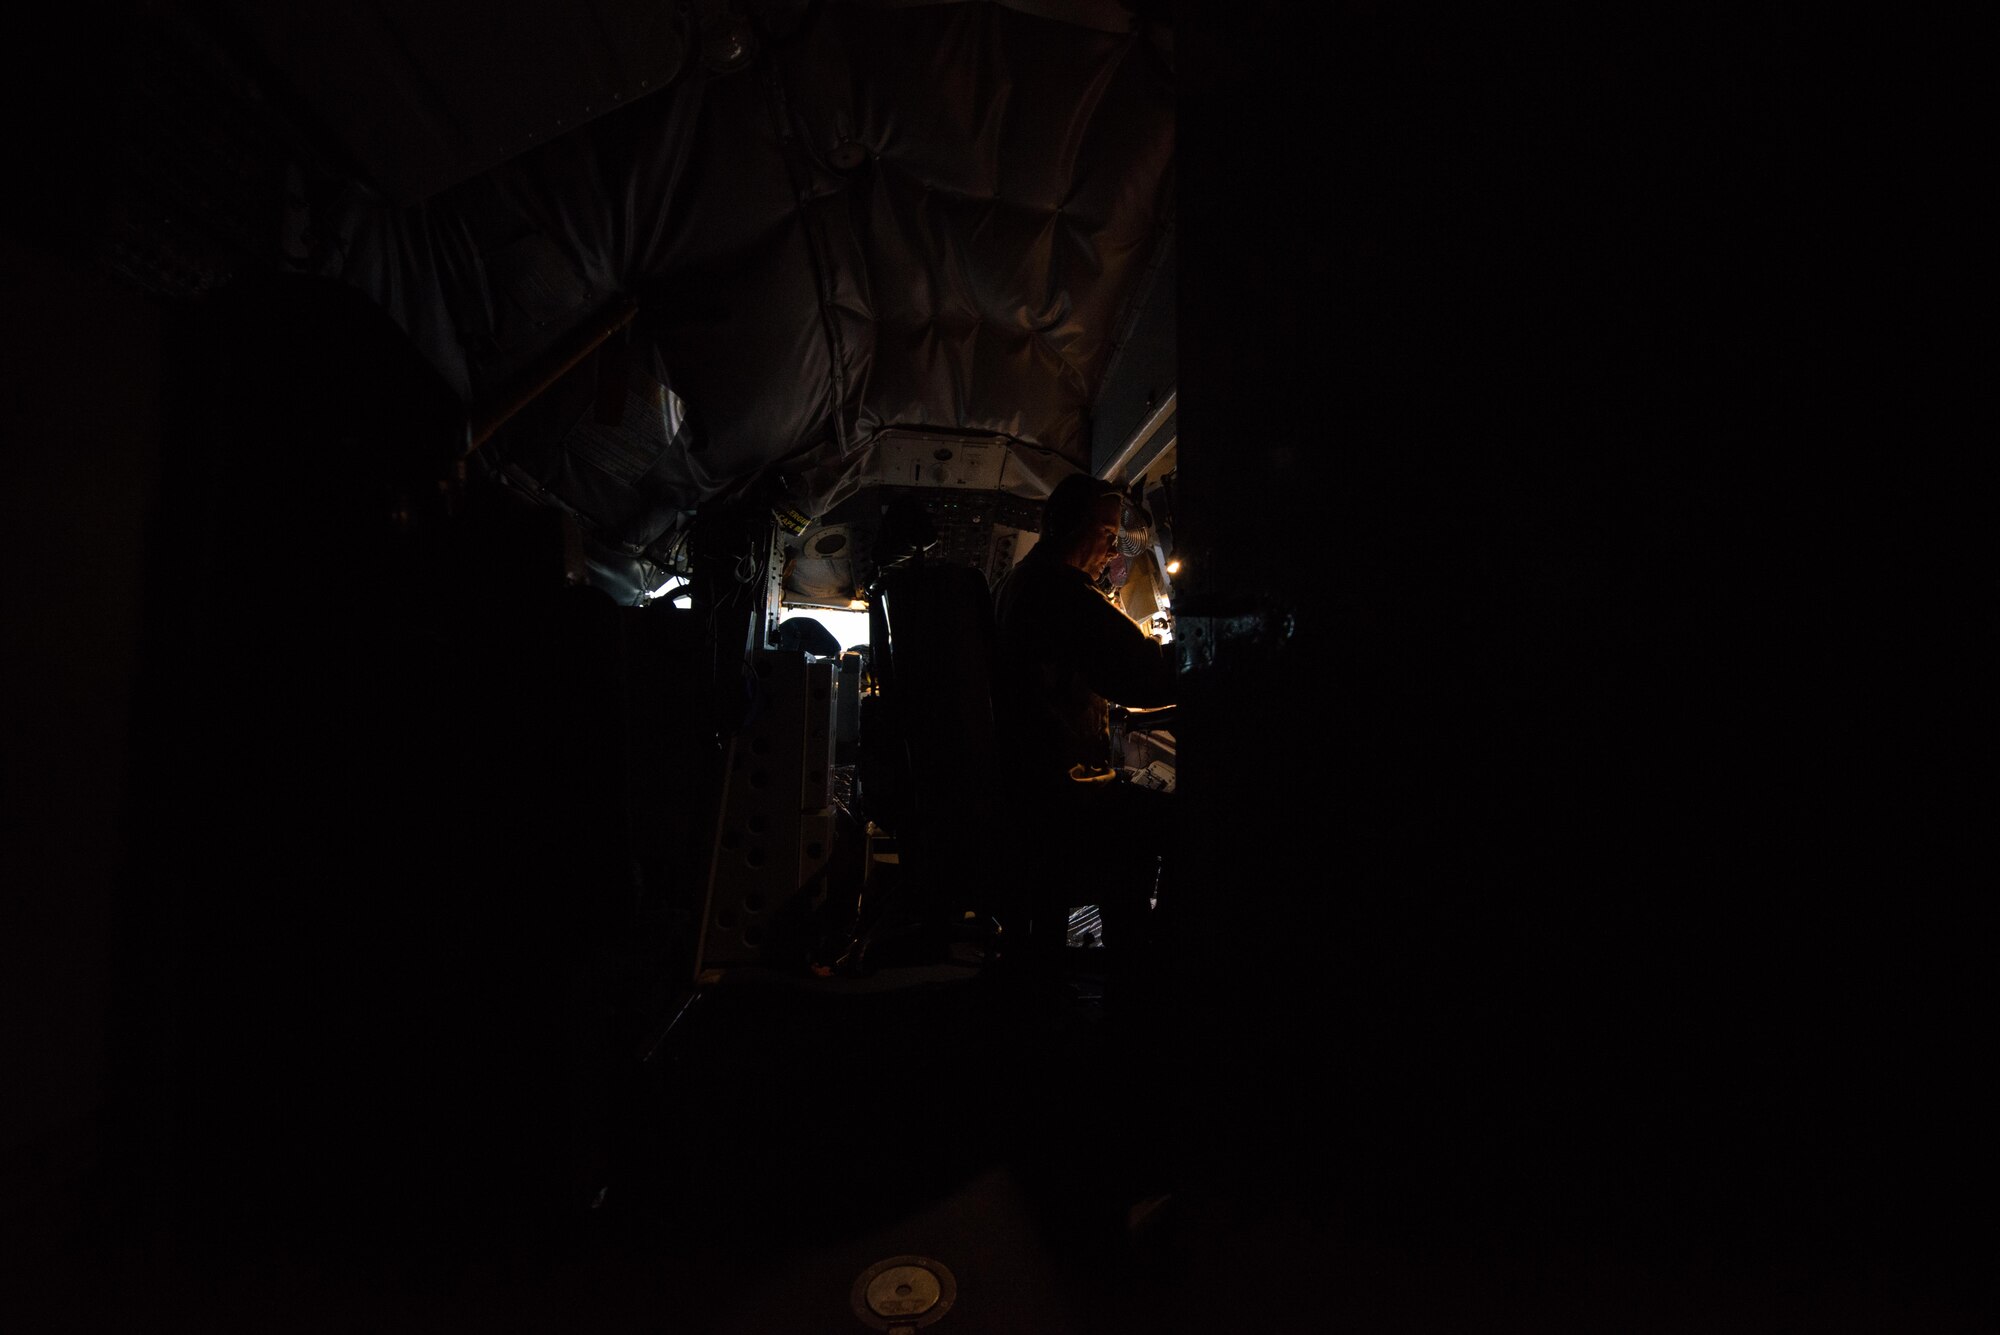 Senior Master Sgt.  Barry, 340th Expeditionary Air Refueling Squadron boom operator, calculates the final amount of fuel given to U.S. and coalition aircraft in support of OPERATION INHERENT RESOLVE September 16, 2015. (U.S. Air Force photo/Staff Sgt. Alexandre Montes)  